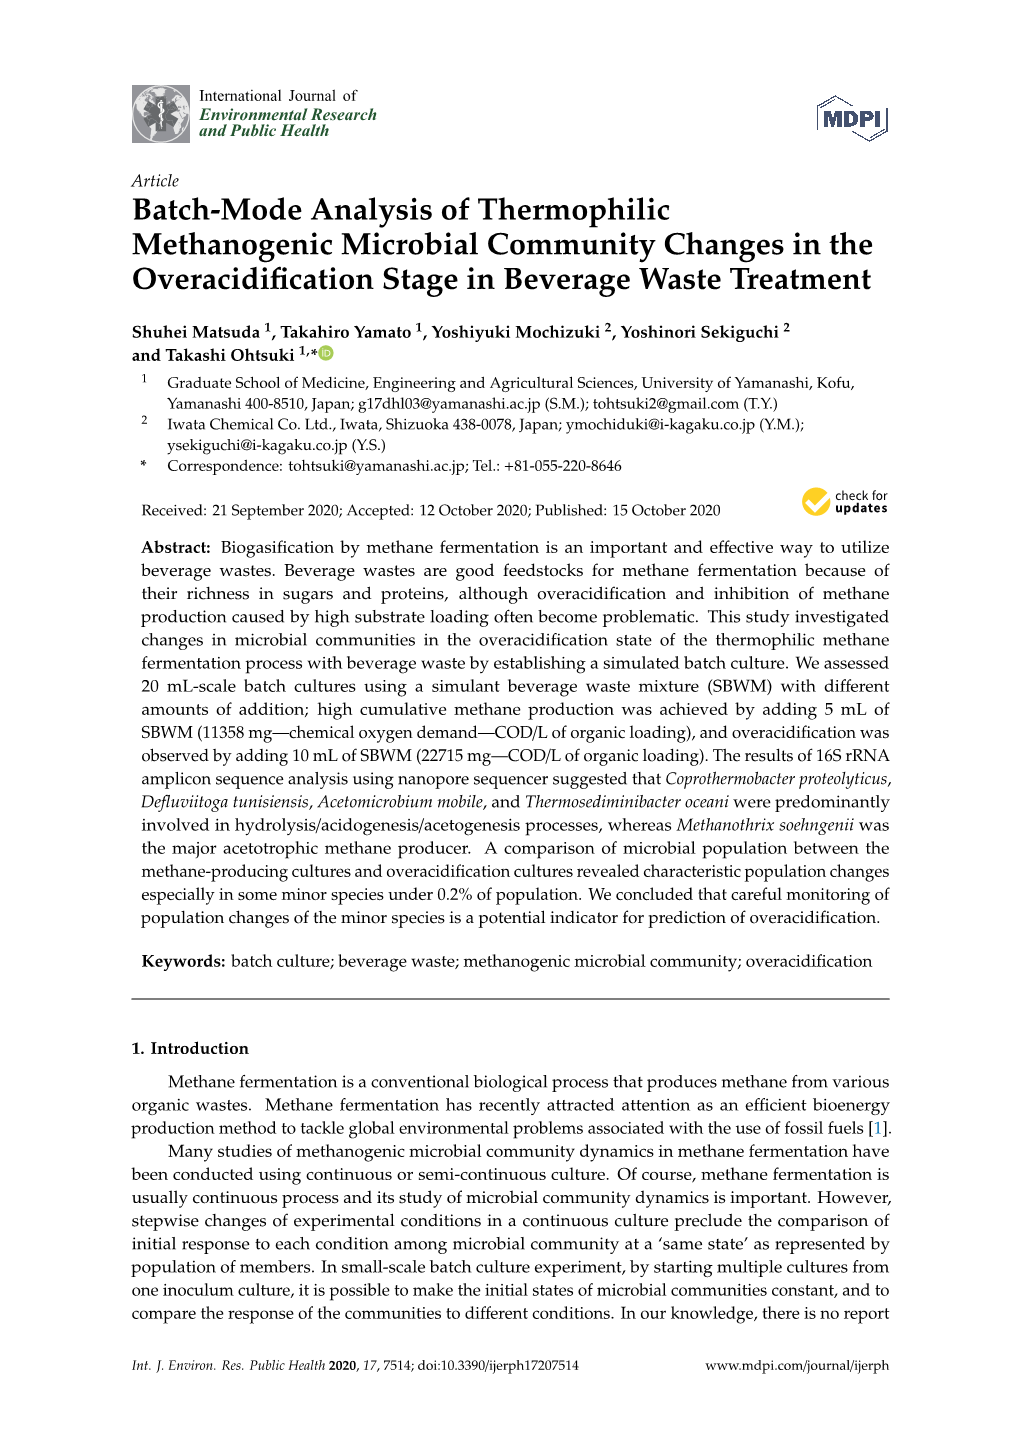 Batch-Mode Analysis of Thermophilic Methanogenic Microbial Community Changes in the Overacidification Stage in Beverage Waste Tr